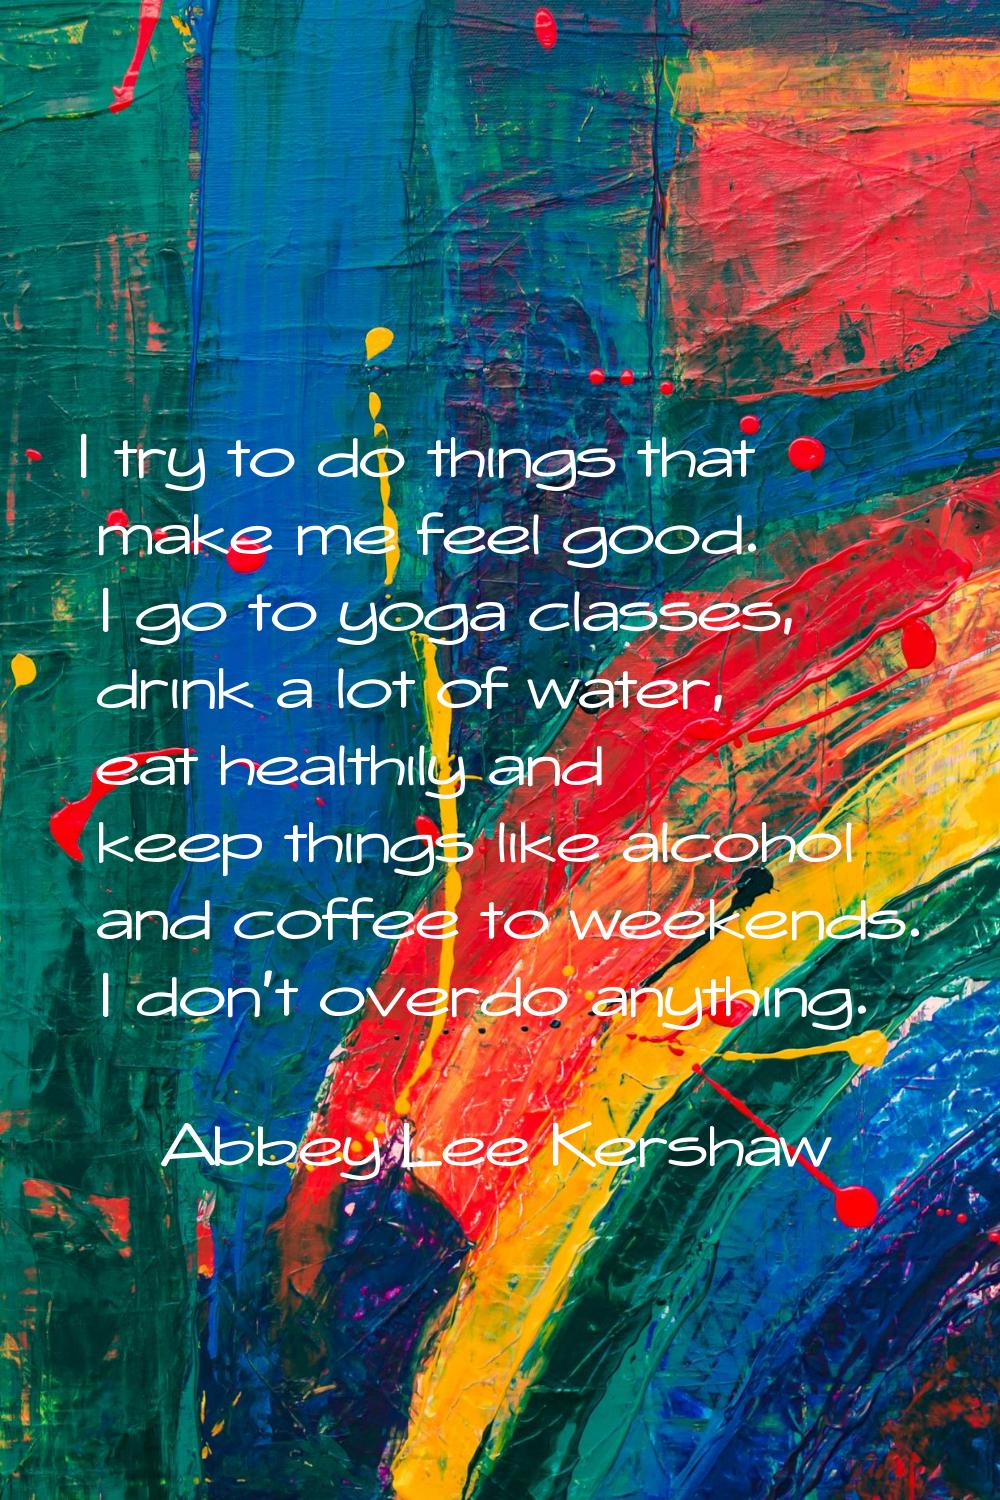 I try to do things that make me feel good. I go to yoga classes, drink a lot of water, eat healthil